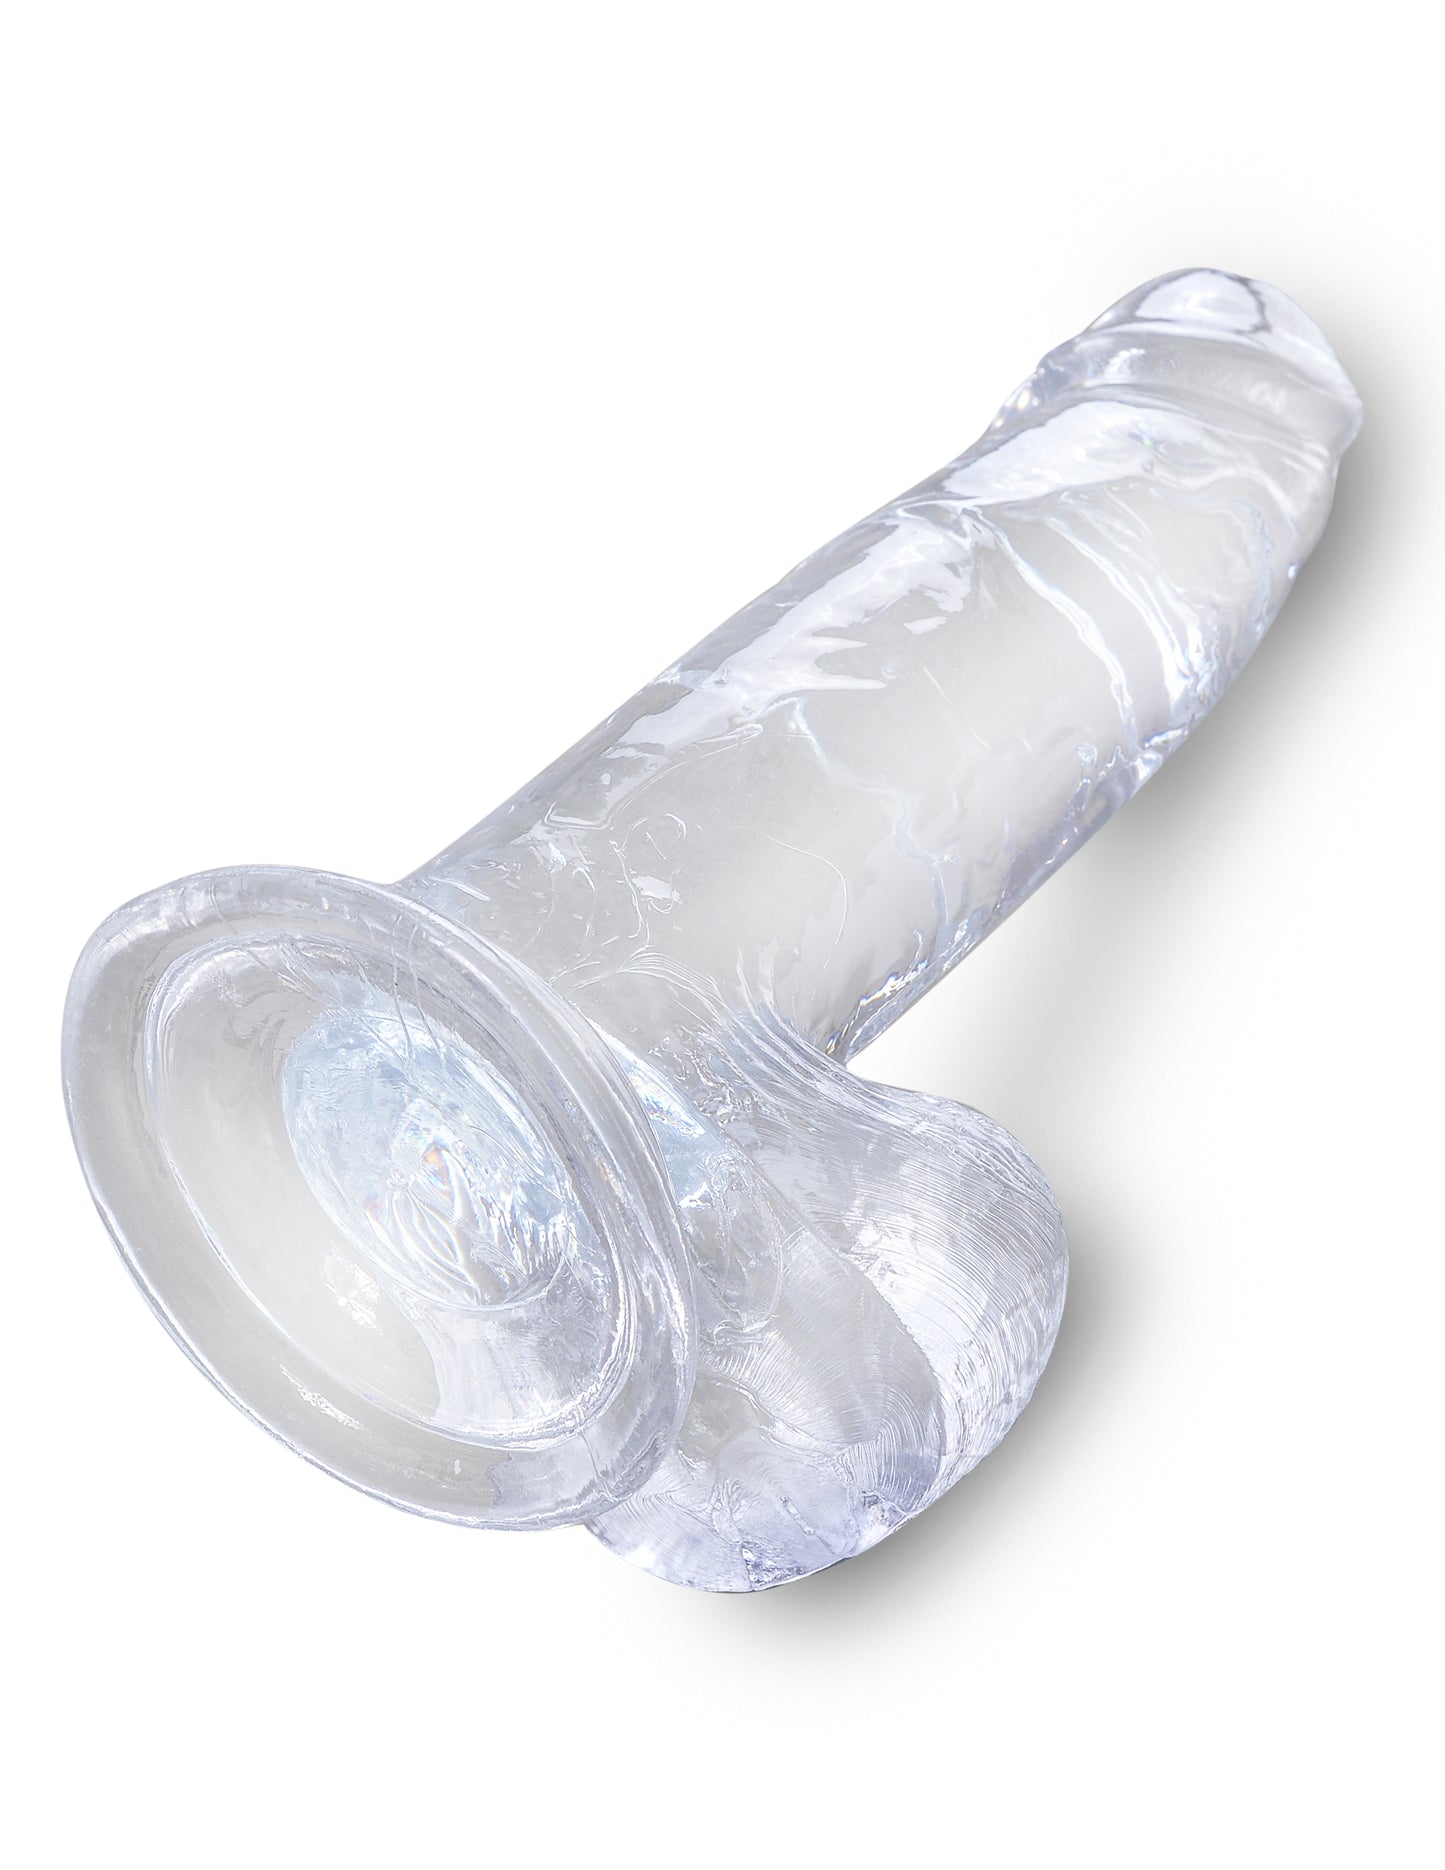 King Cock - 7 inch with balls - Clear